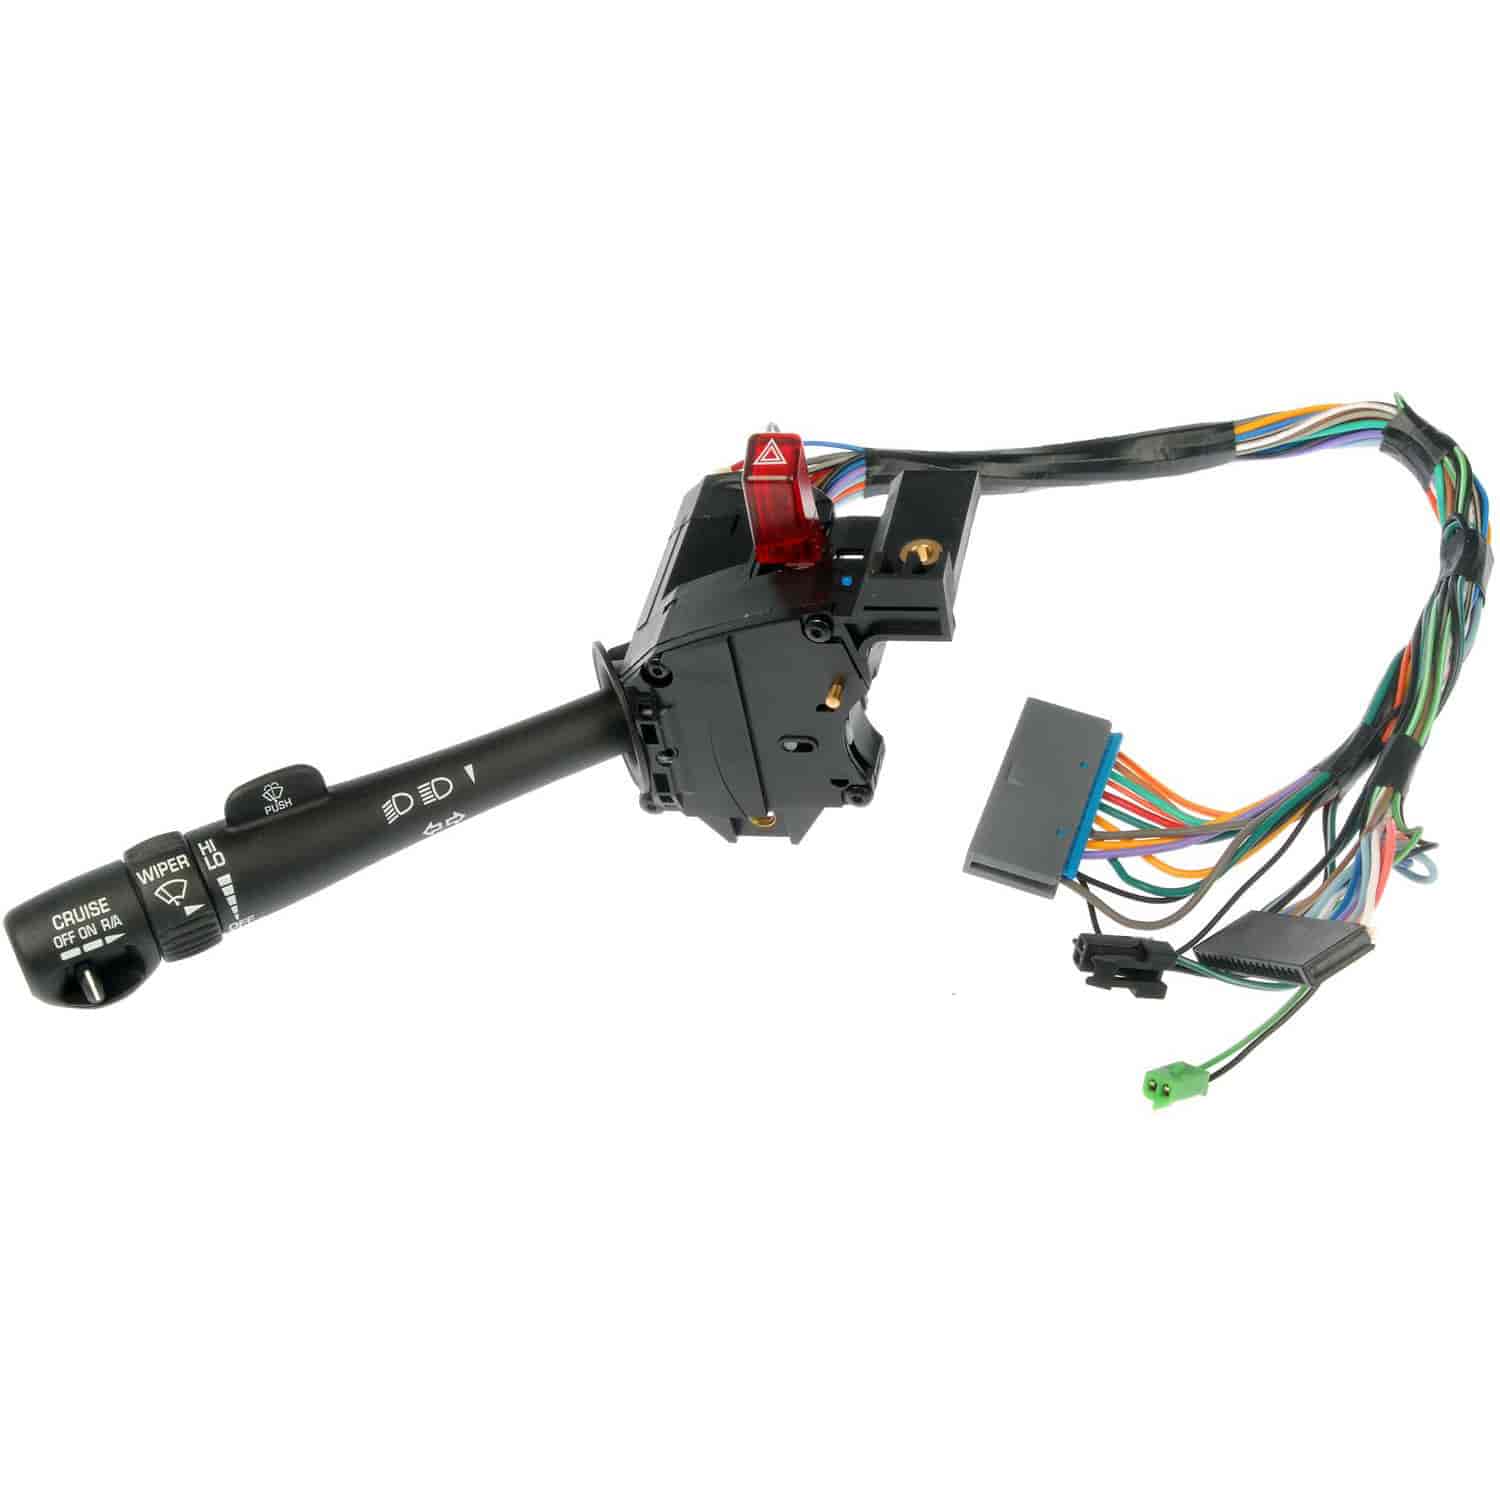 Multifunction Switch Assembly